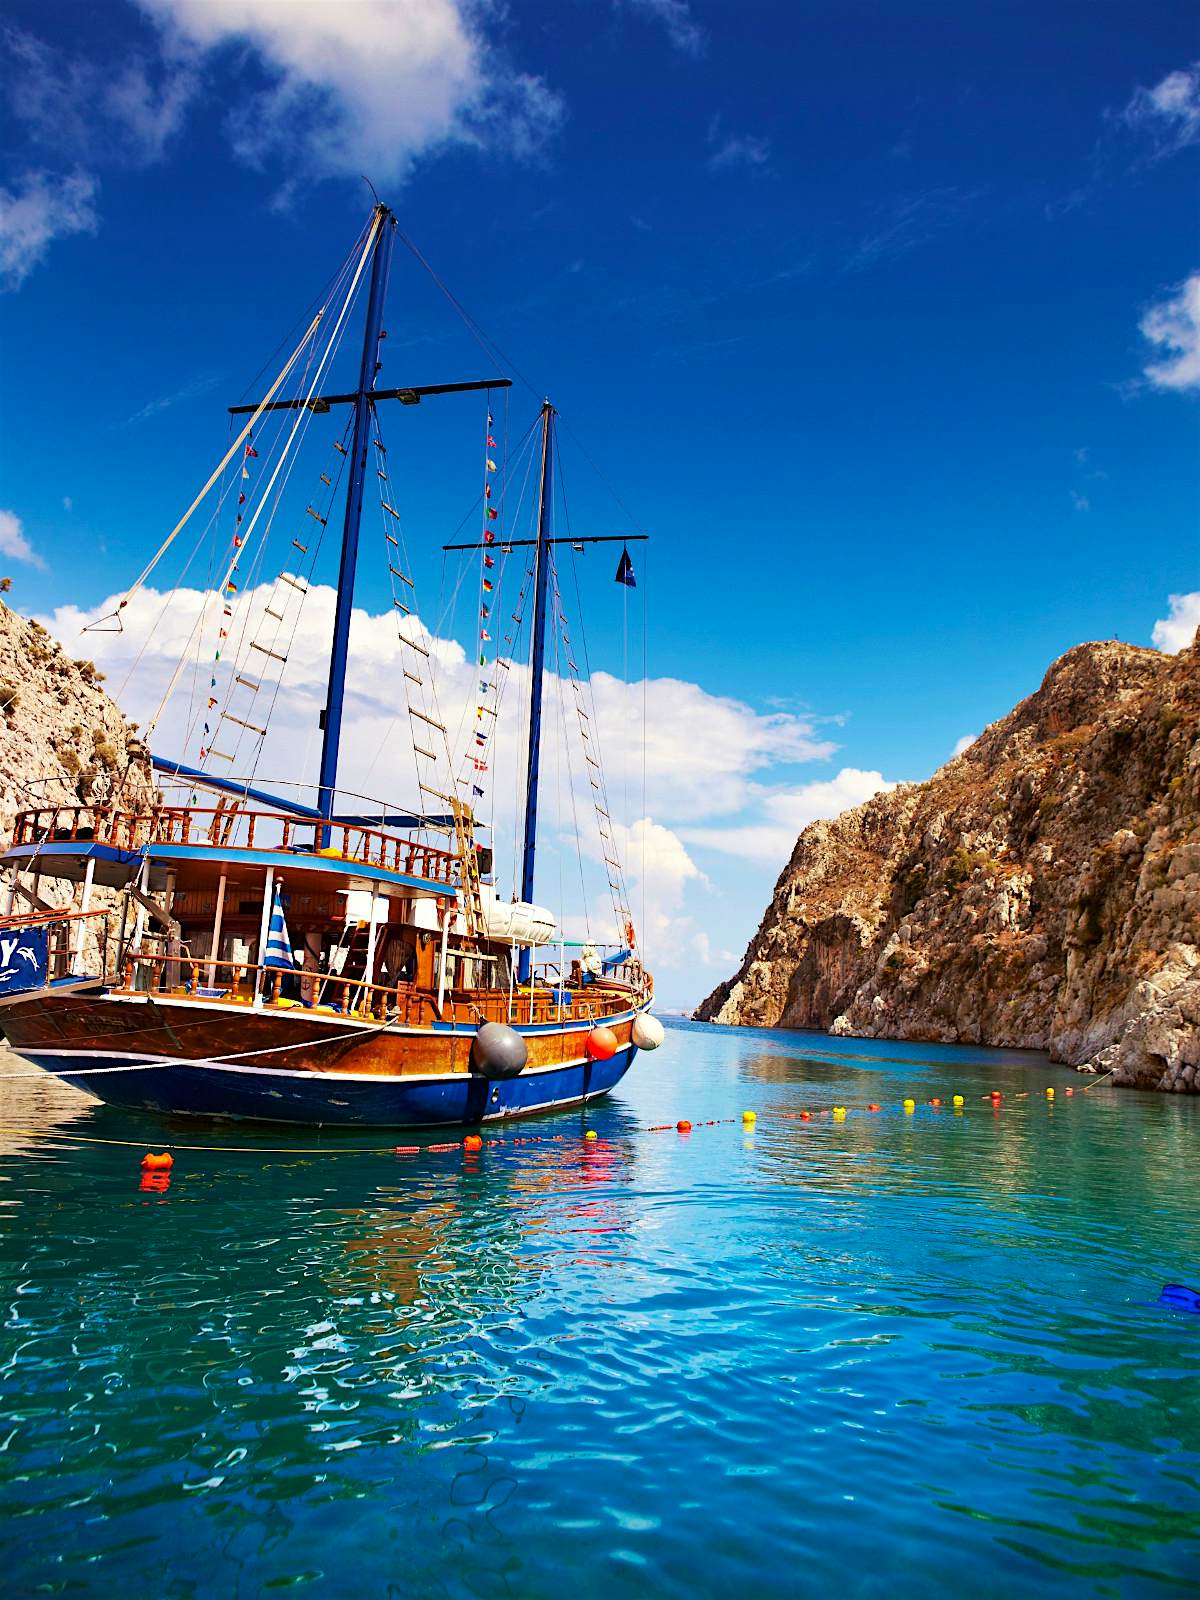 Plan your perfect Greek islandhopping adventure Lonely